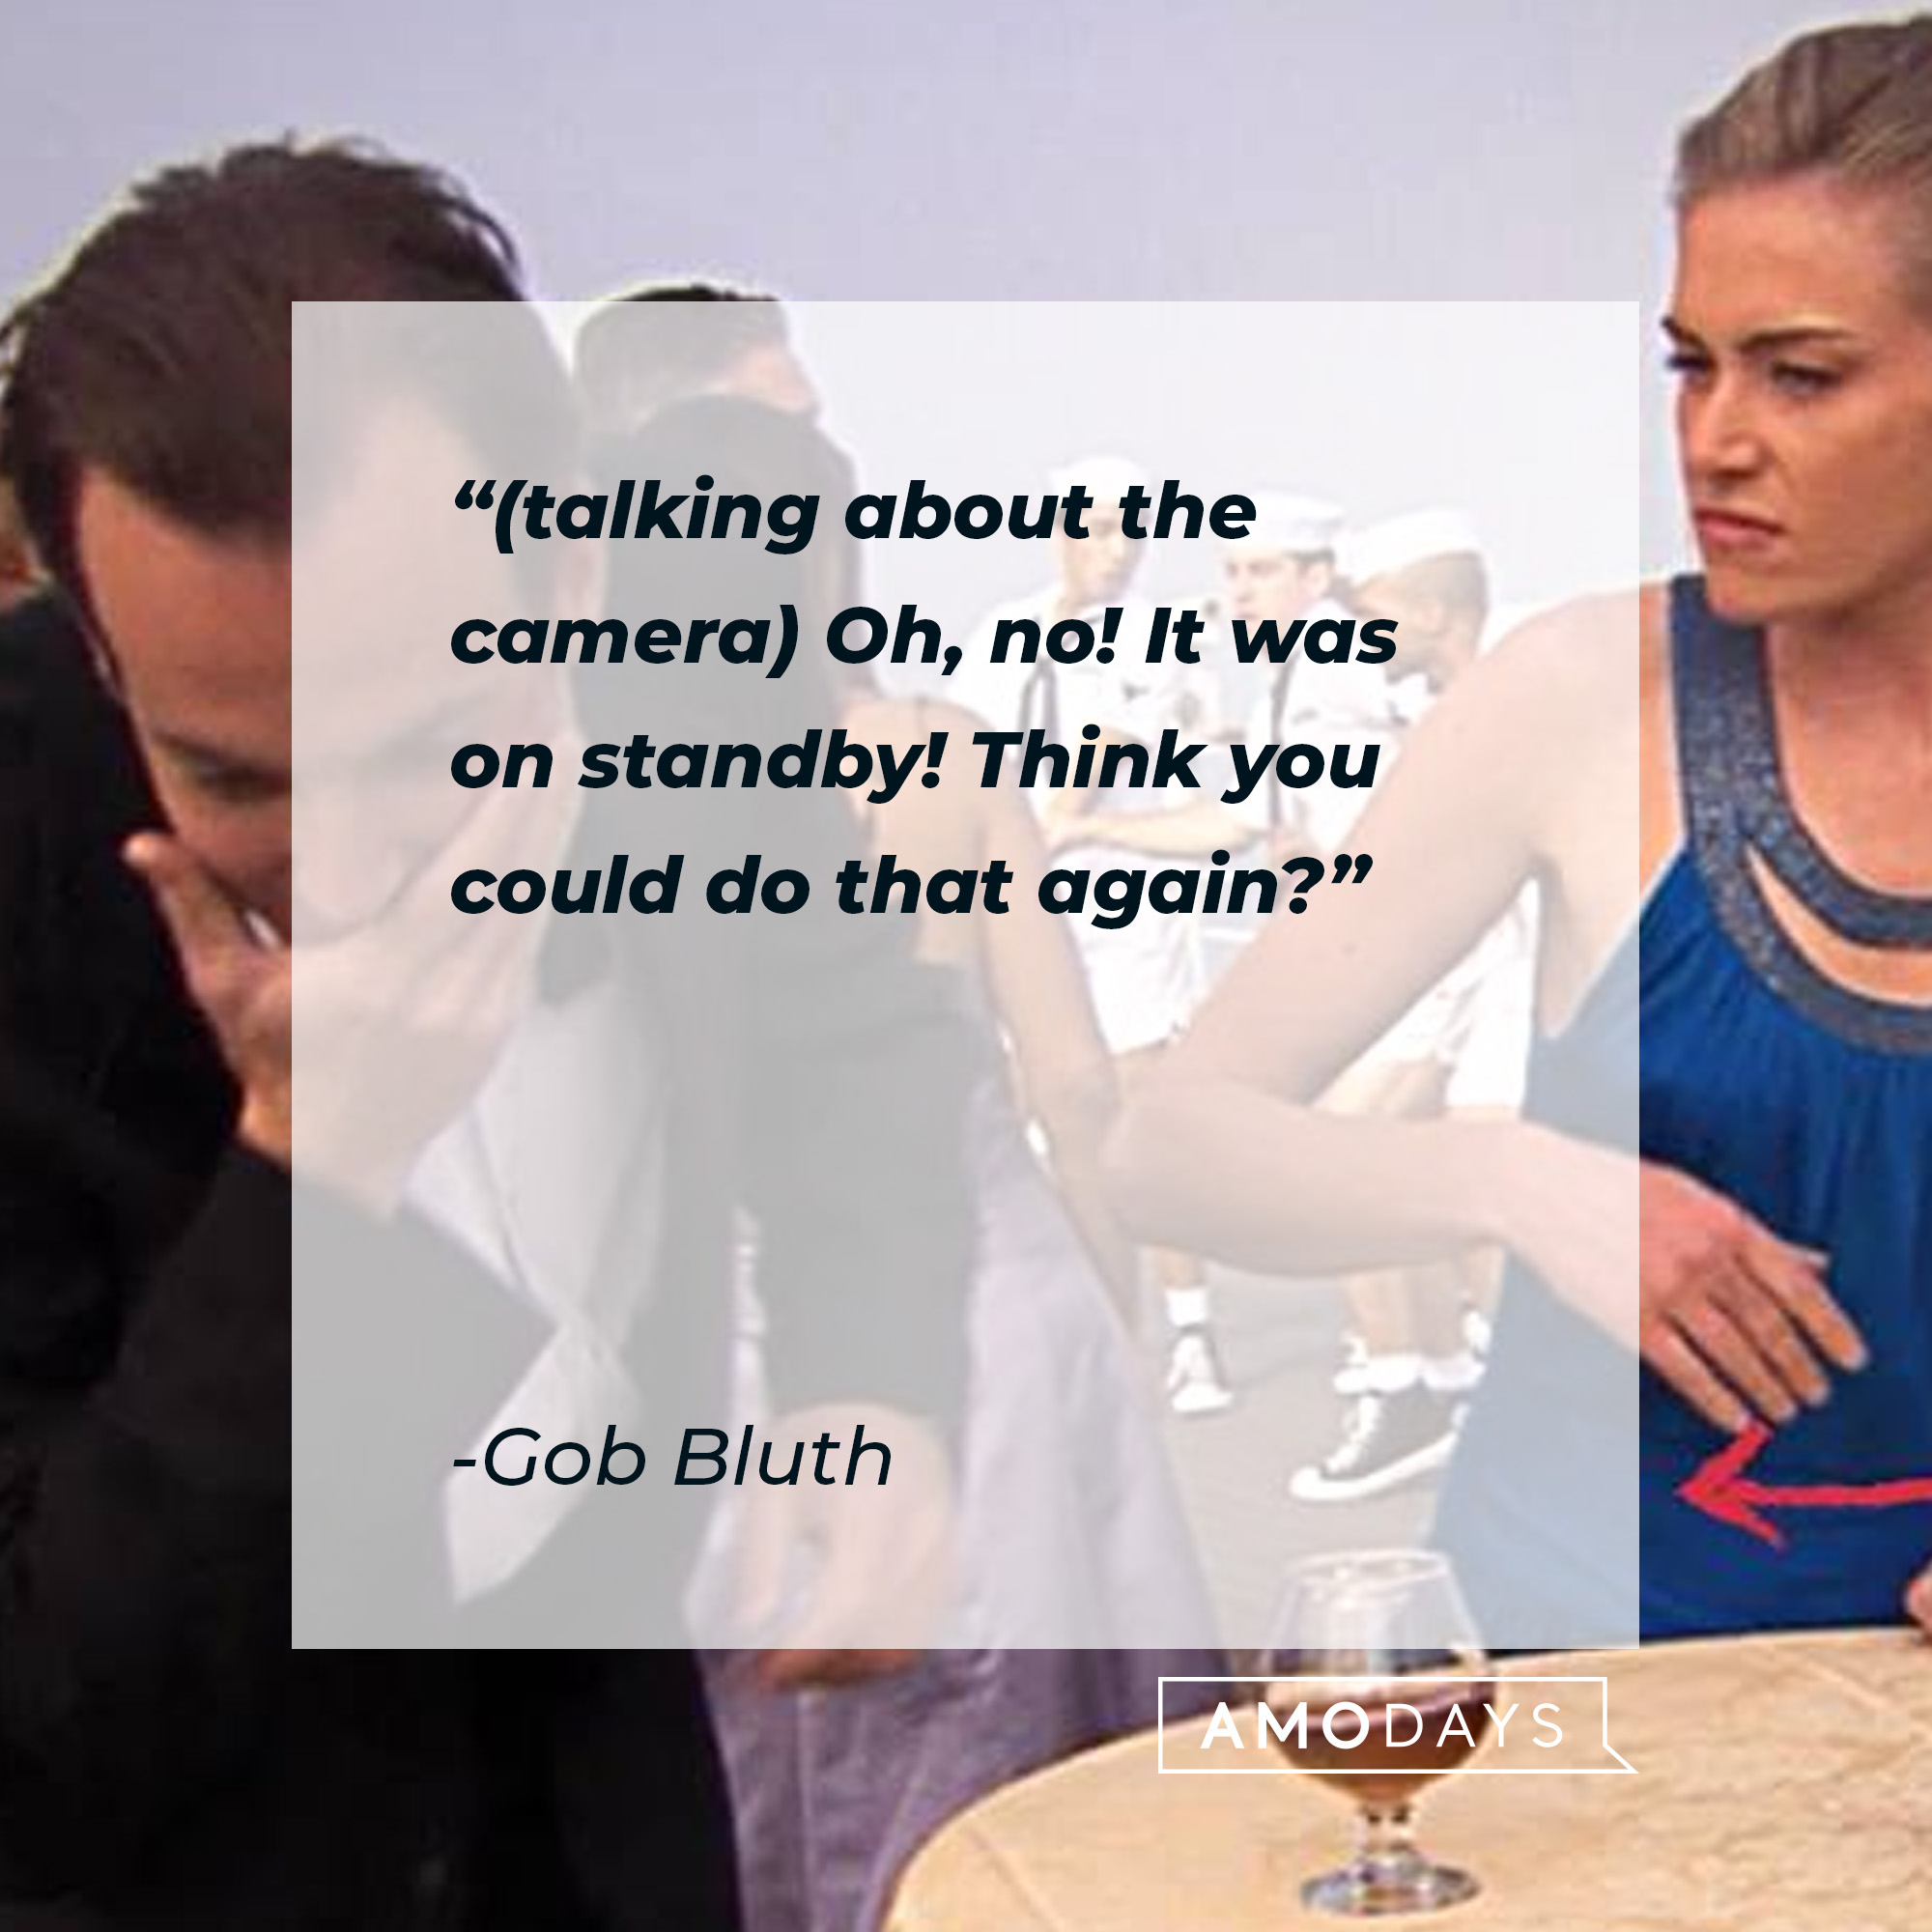 Gob Bluth's quote: "(talking about the camera) Oh, no! It was on standby! Think you could do that again?" | Source: facebook.com/ArrestedDevelopment